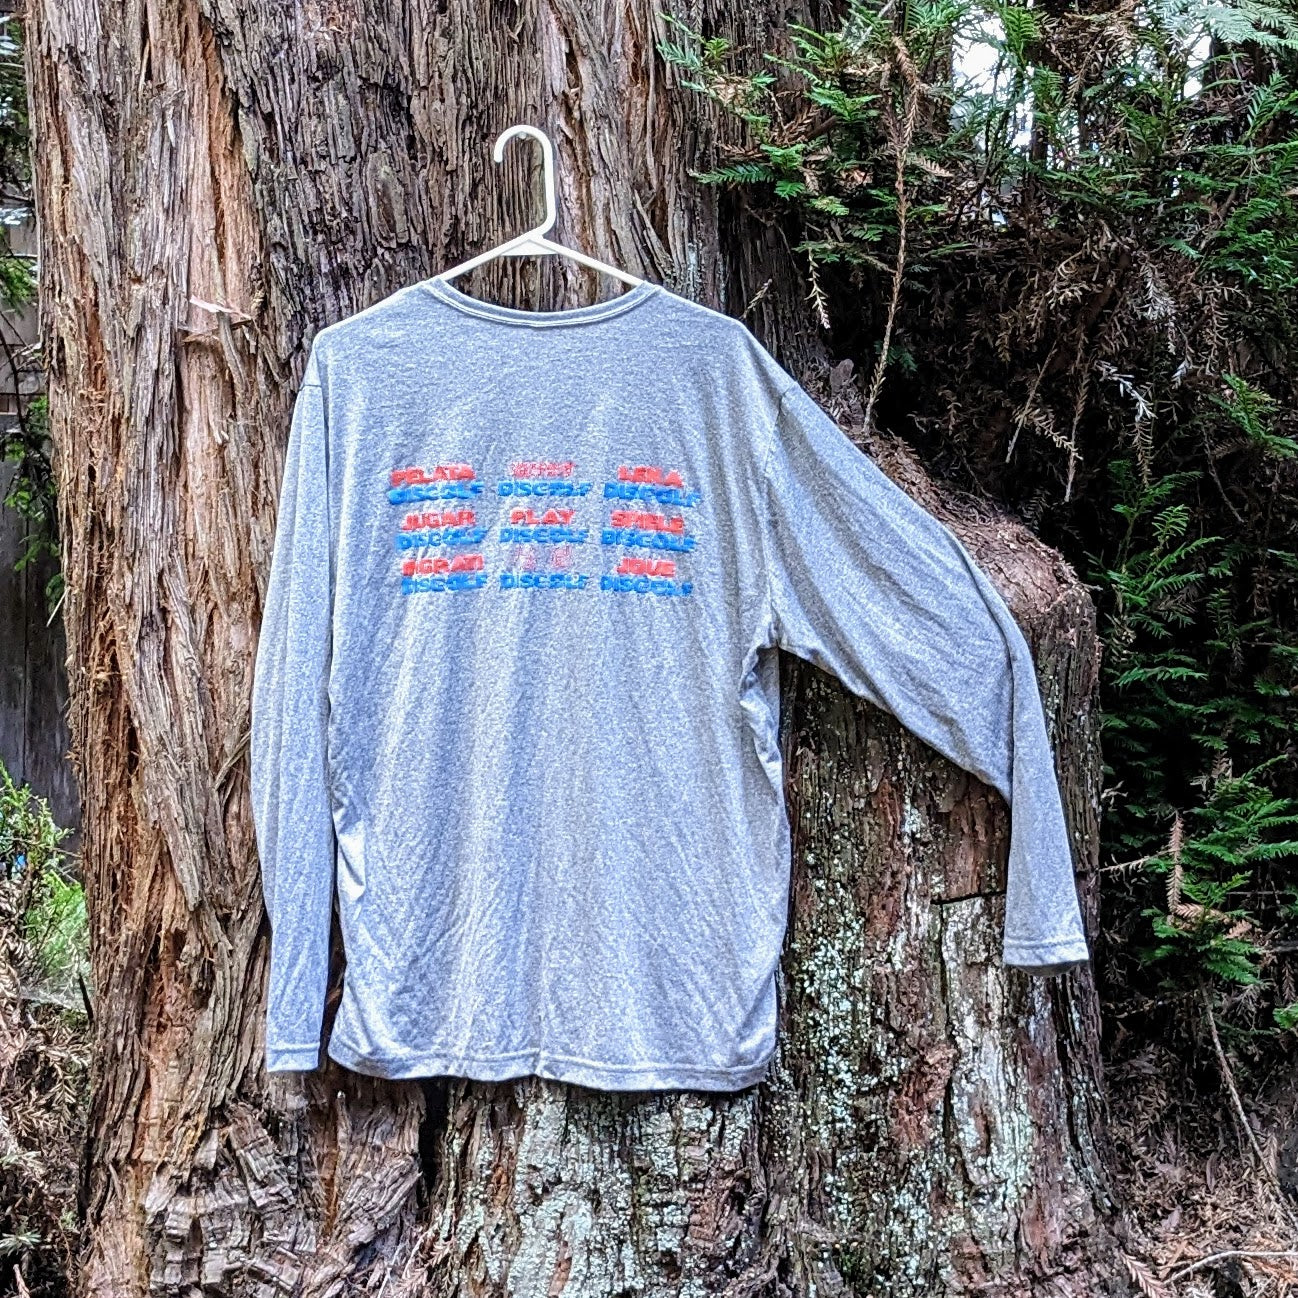 Clearance- Gray Long Sleeve with the Play DiscGolf logo front and Languages Grid version of logo on back, Size XL